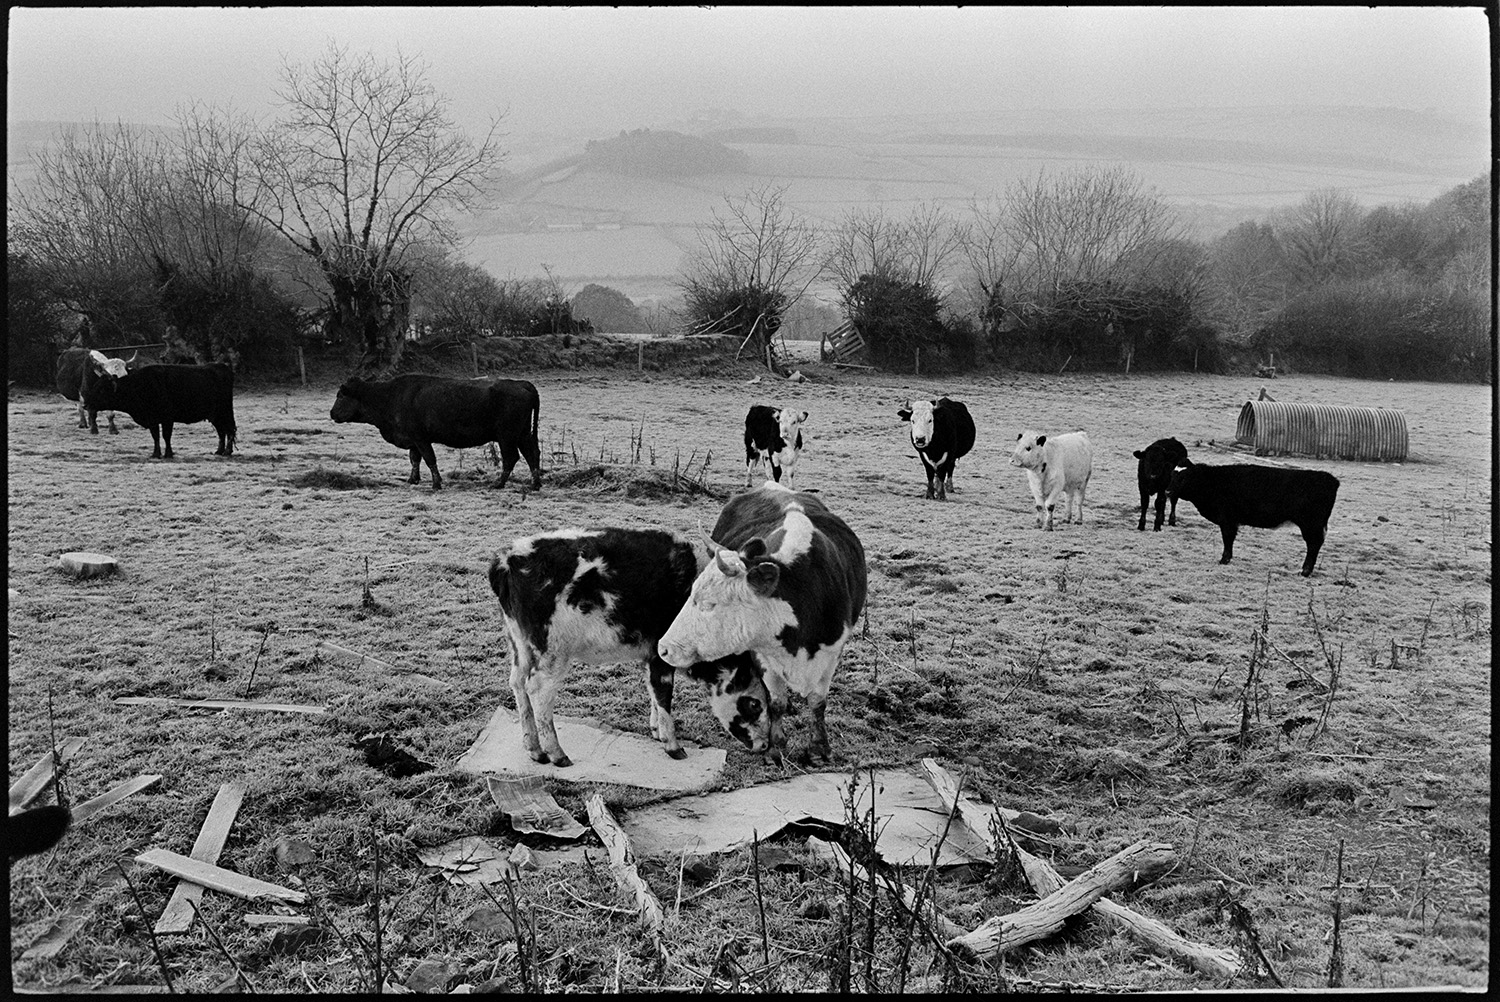 Cattle and sheep, frosty morning.
[Cattle standing in a field at Ashwell, Dolton on a frosty morning. Some are standing on scrap pieces of timber. Misty hills are visible in the distance.]